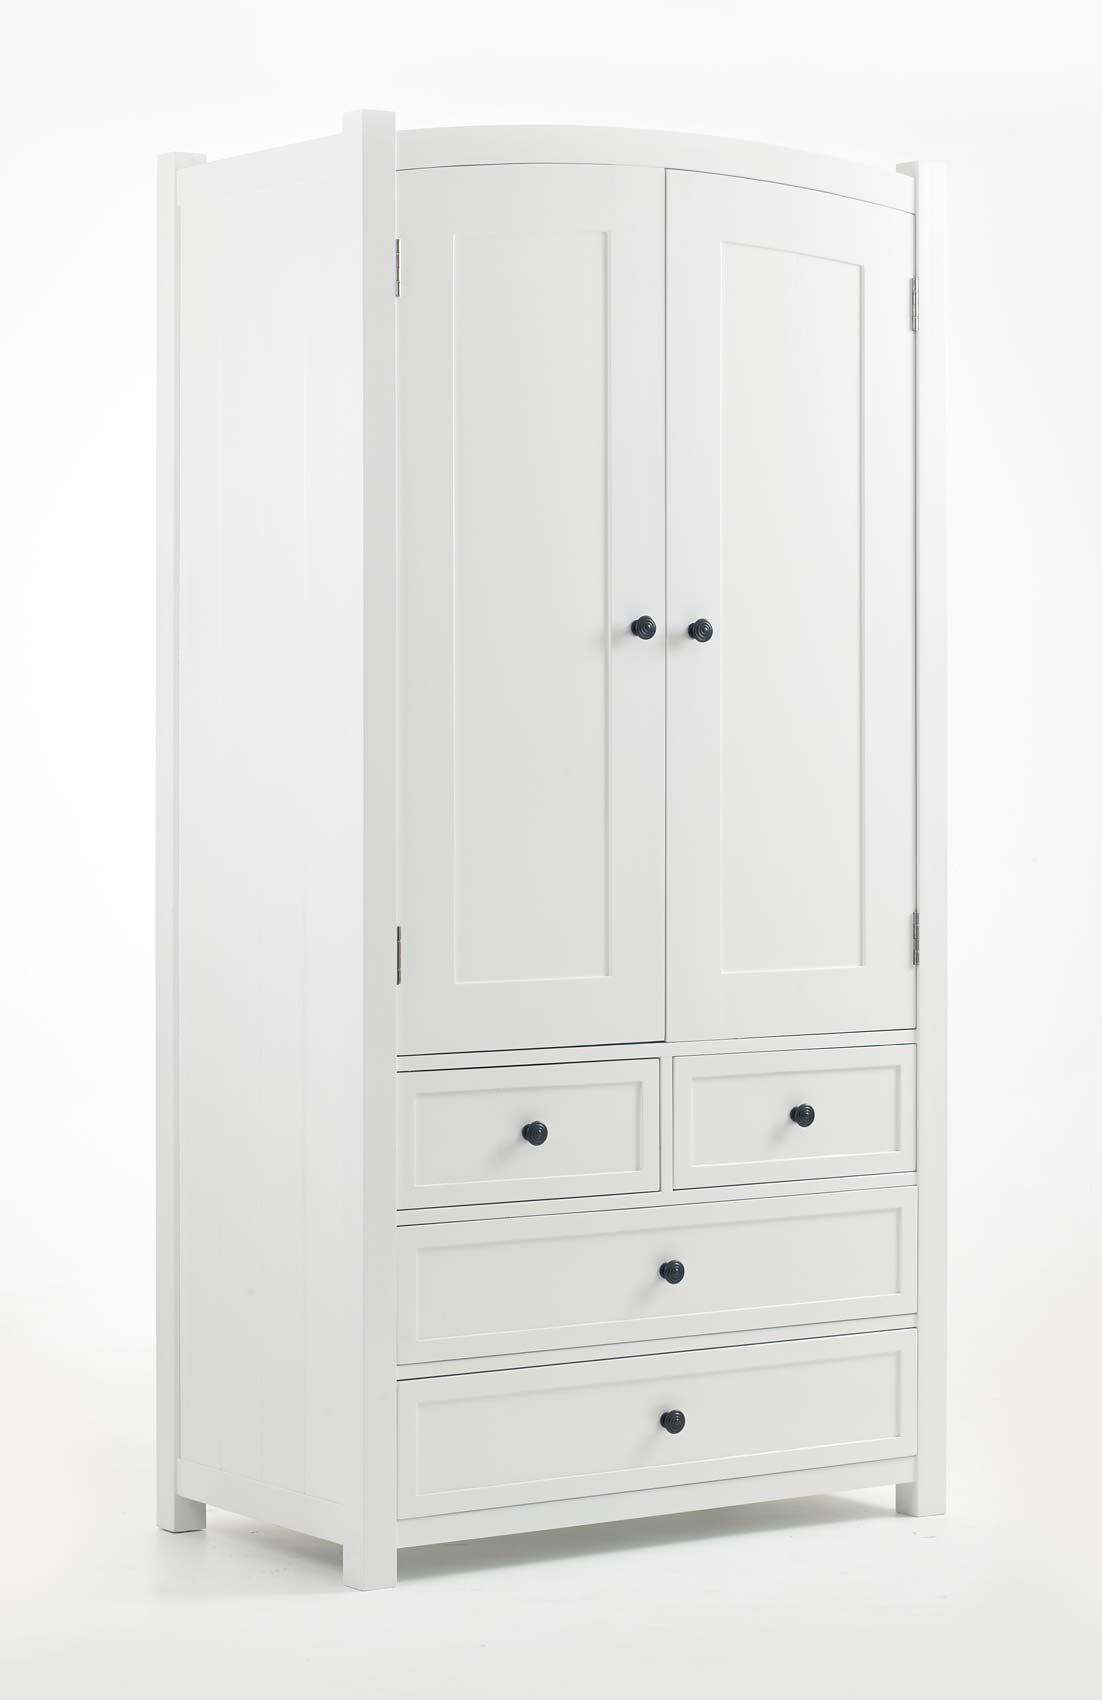 Contemporary Childrenu0027s white painted double wardrobe and chest of drawers white wardrobe with drawers